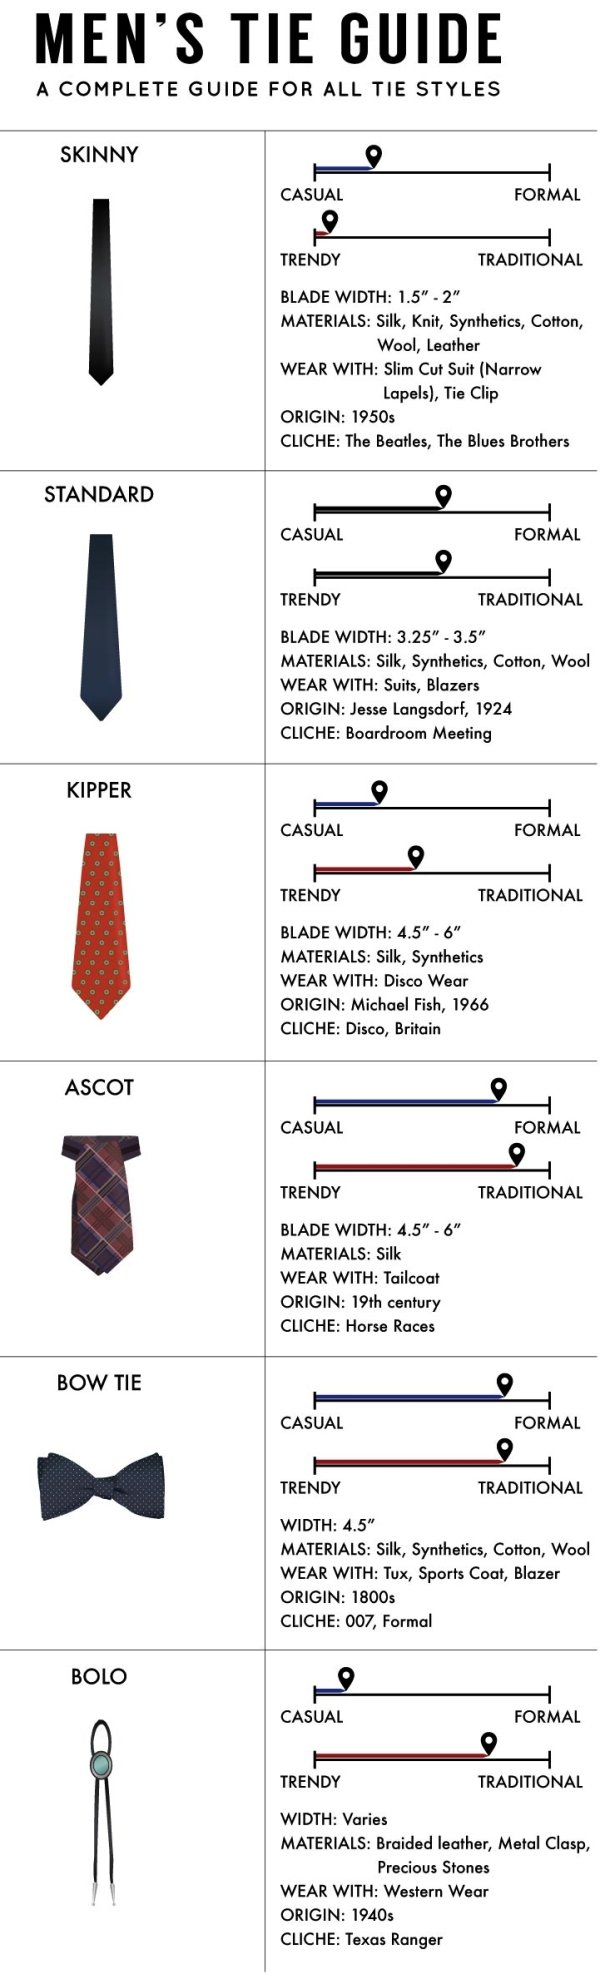 useful charts and infographics - shoe - Men'S Tie Guide A Complete Guide For All Tie Styles Skinny Casual Formal Trendy Traditional Blade Width 1.5"2" Materials Silk, Knit, Synthetics, Cotton, Wool, Leather Wear With Slim Cut Suit Narrow Lapels, Tie Clip 